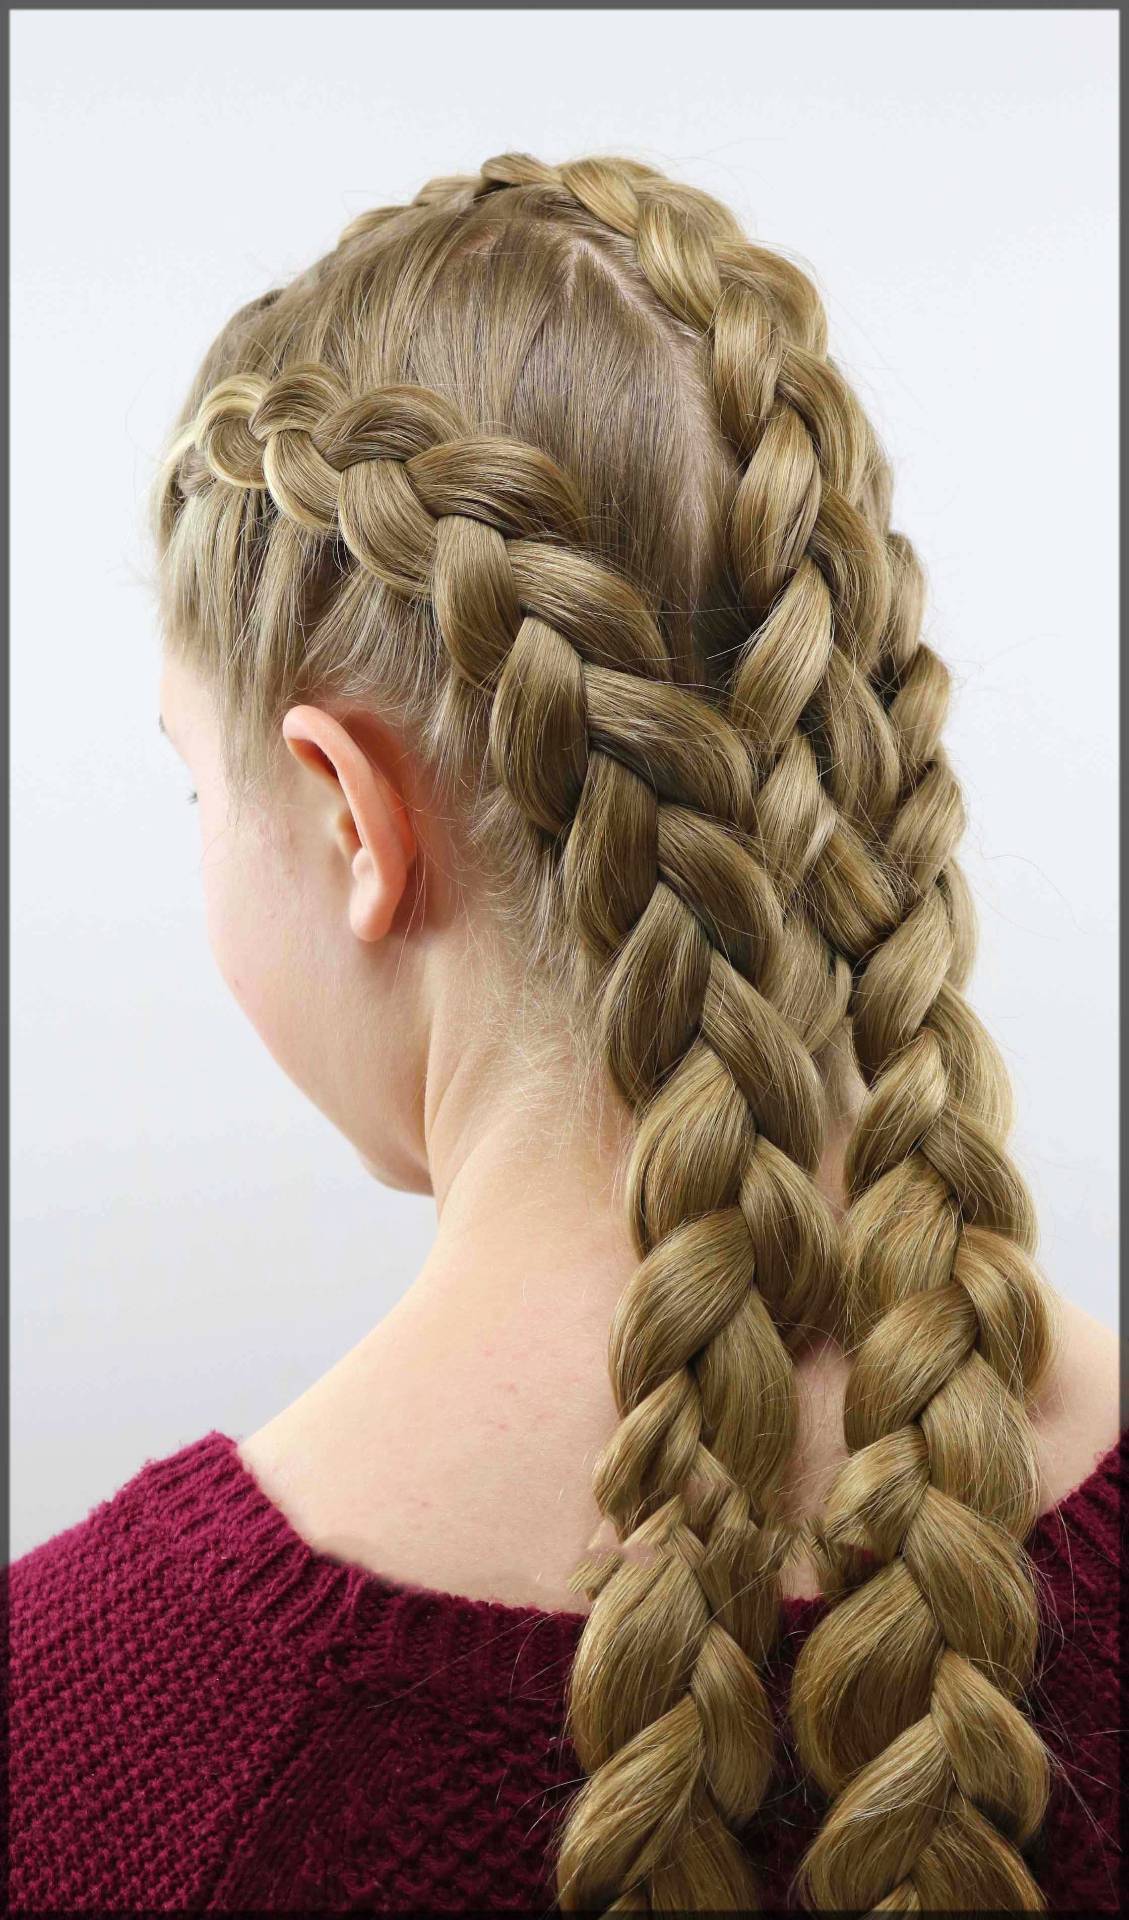 Details more than 73 chinese braid hairstyles - in.eteachers